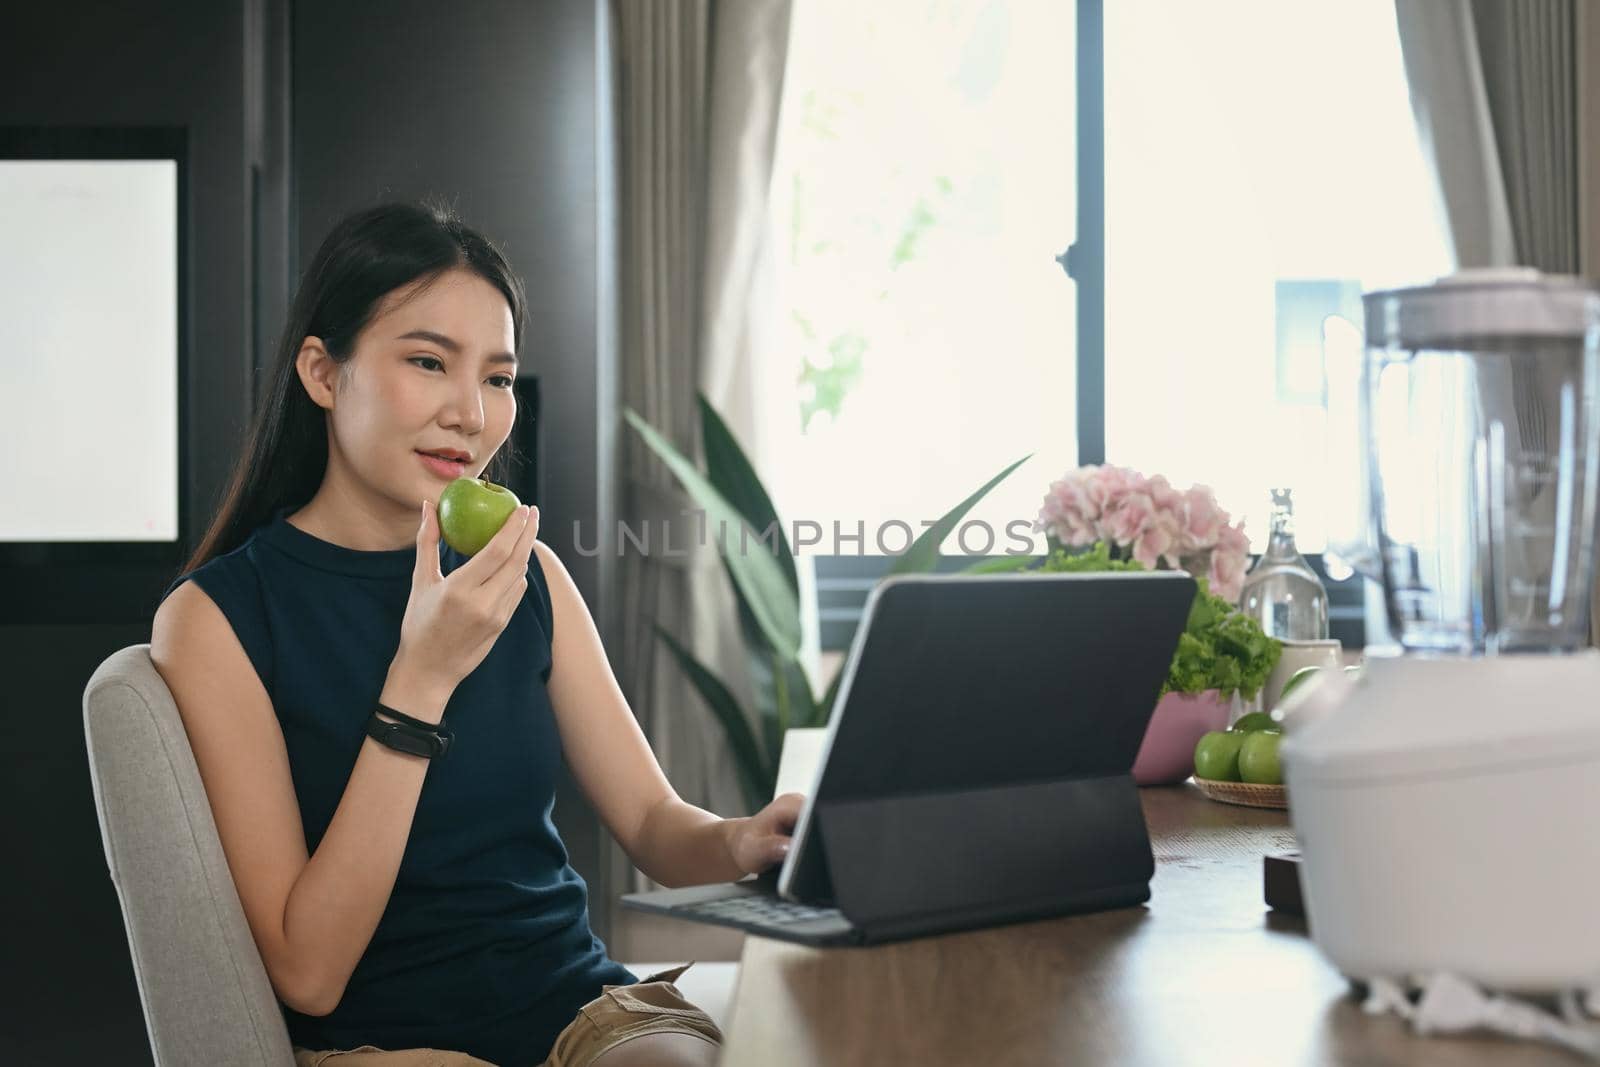 Healthy young woman eating apple and using computer tablet in kitchen. by prathanchorruangsak